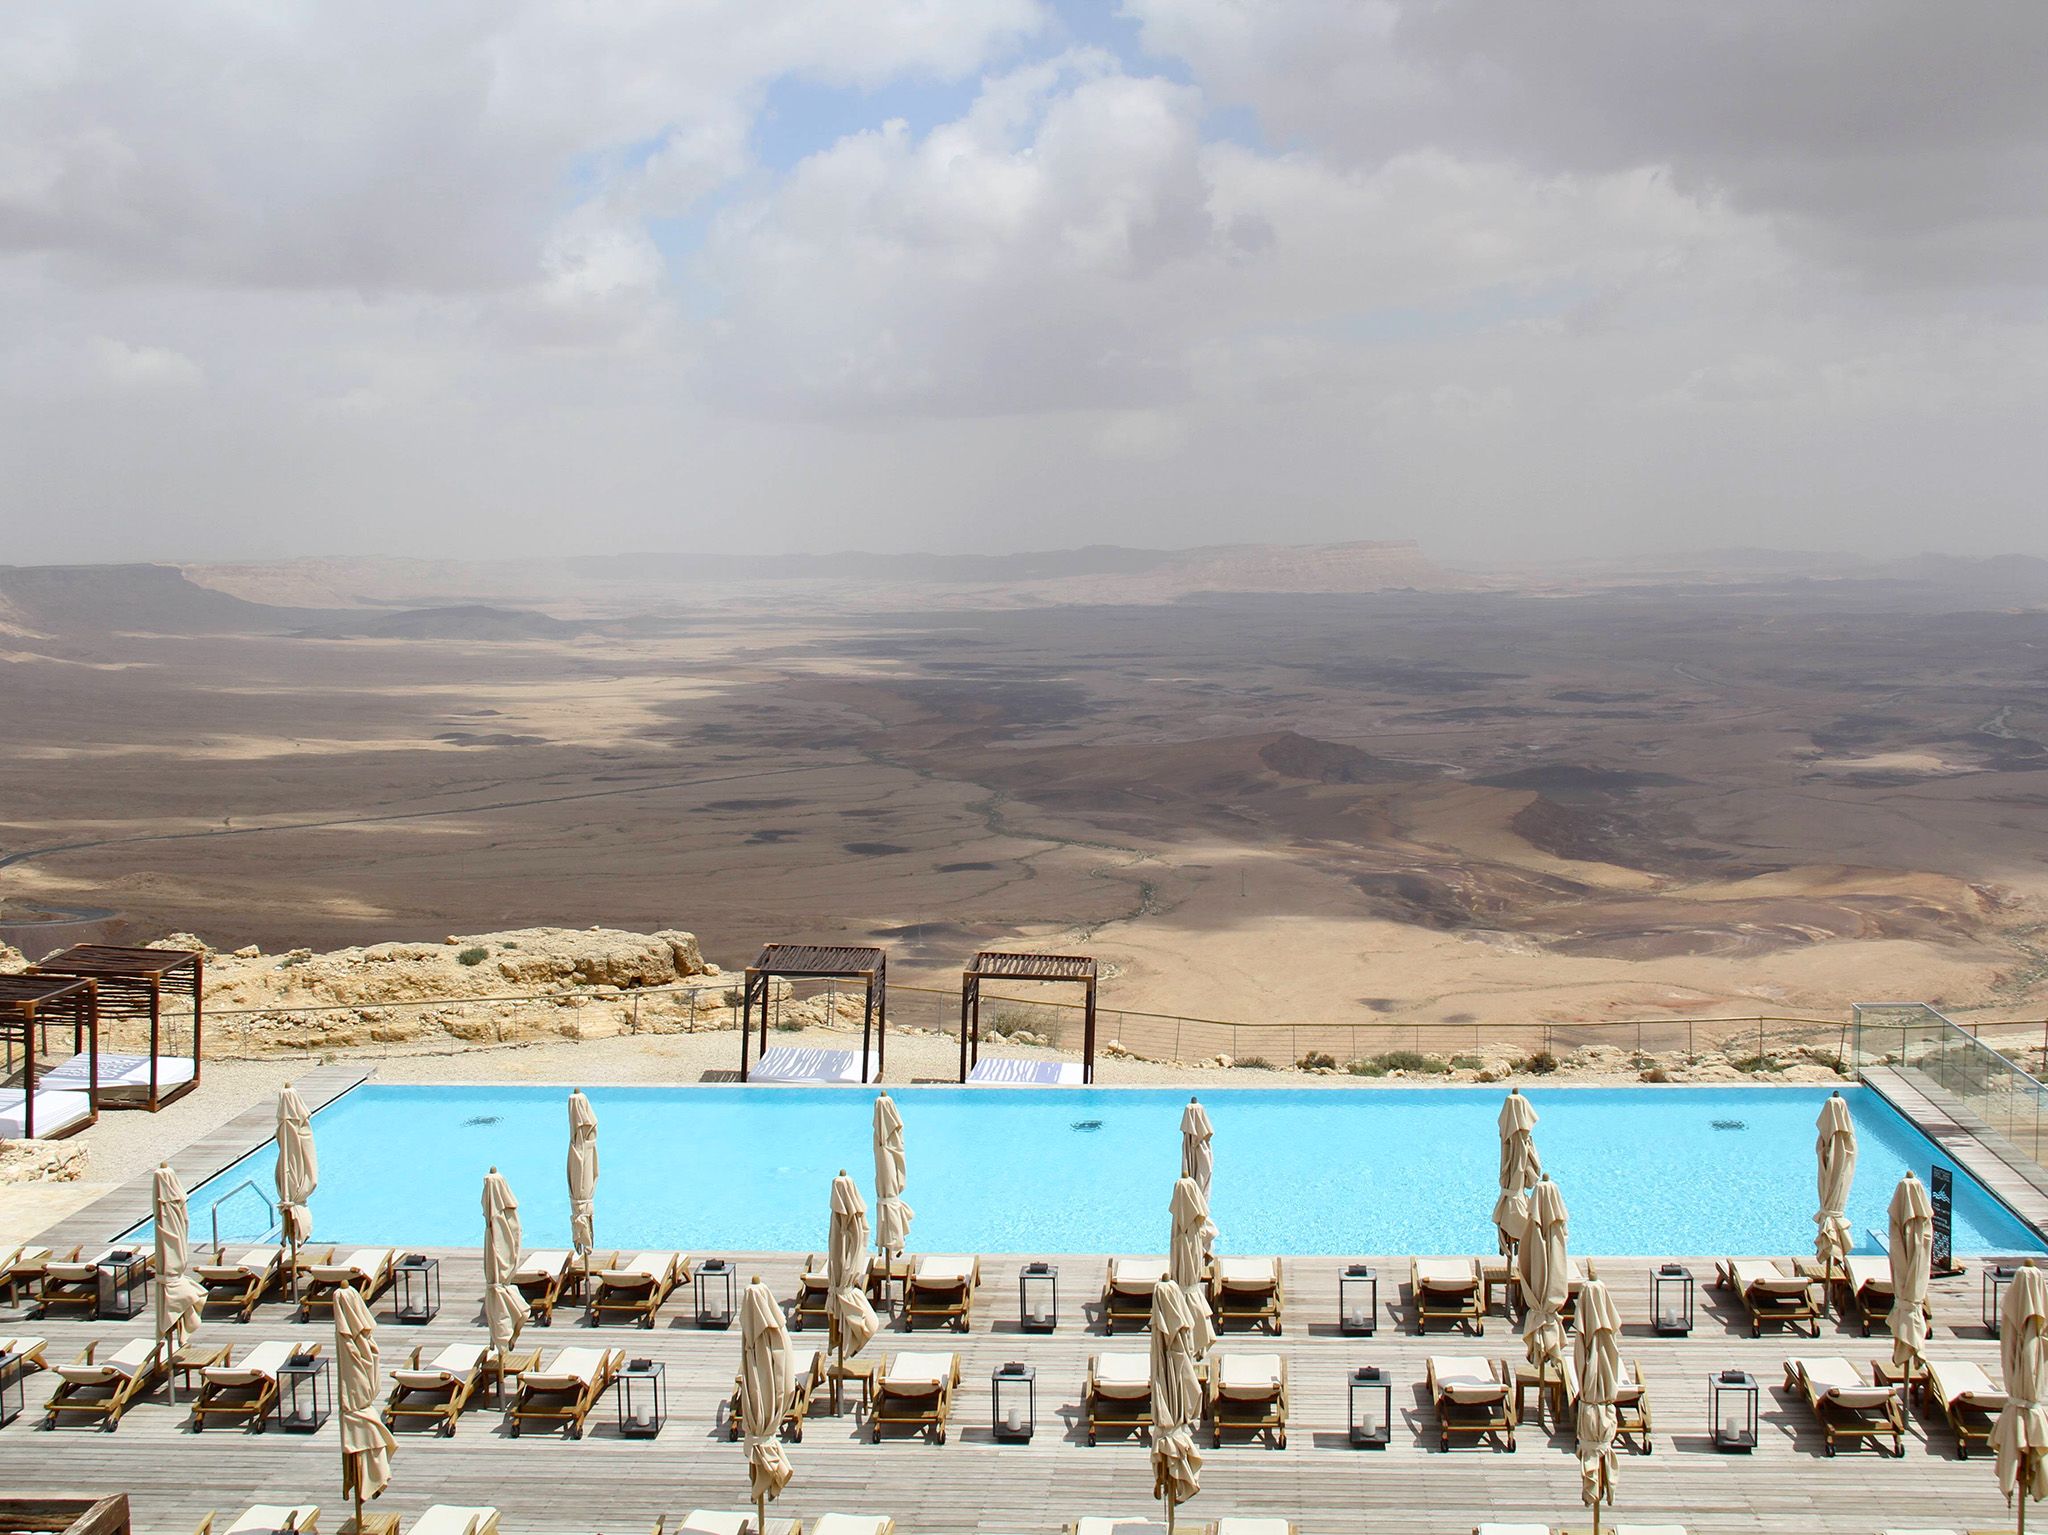 Israel: Outdoor pool at the Beresheet Hotel, located in Israel's Negev Desert. This image is... [Photo of the day - August 2017]